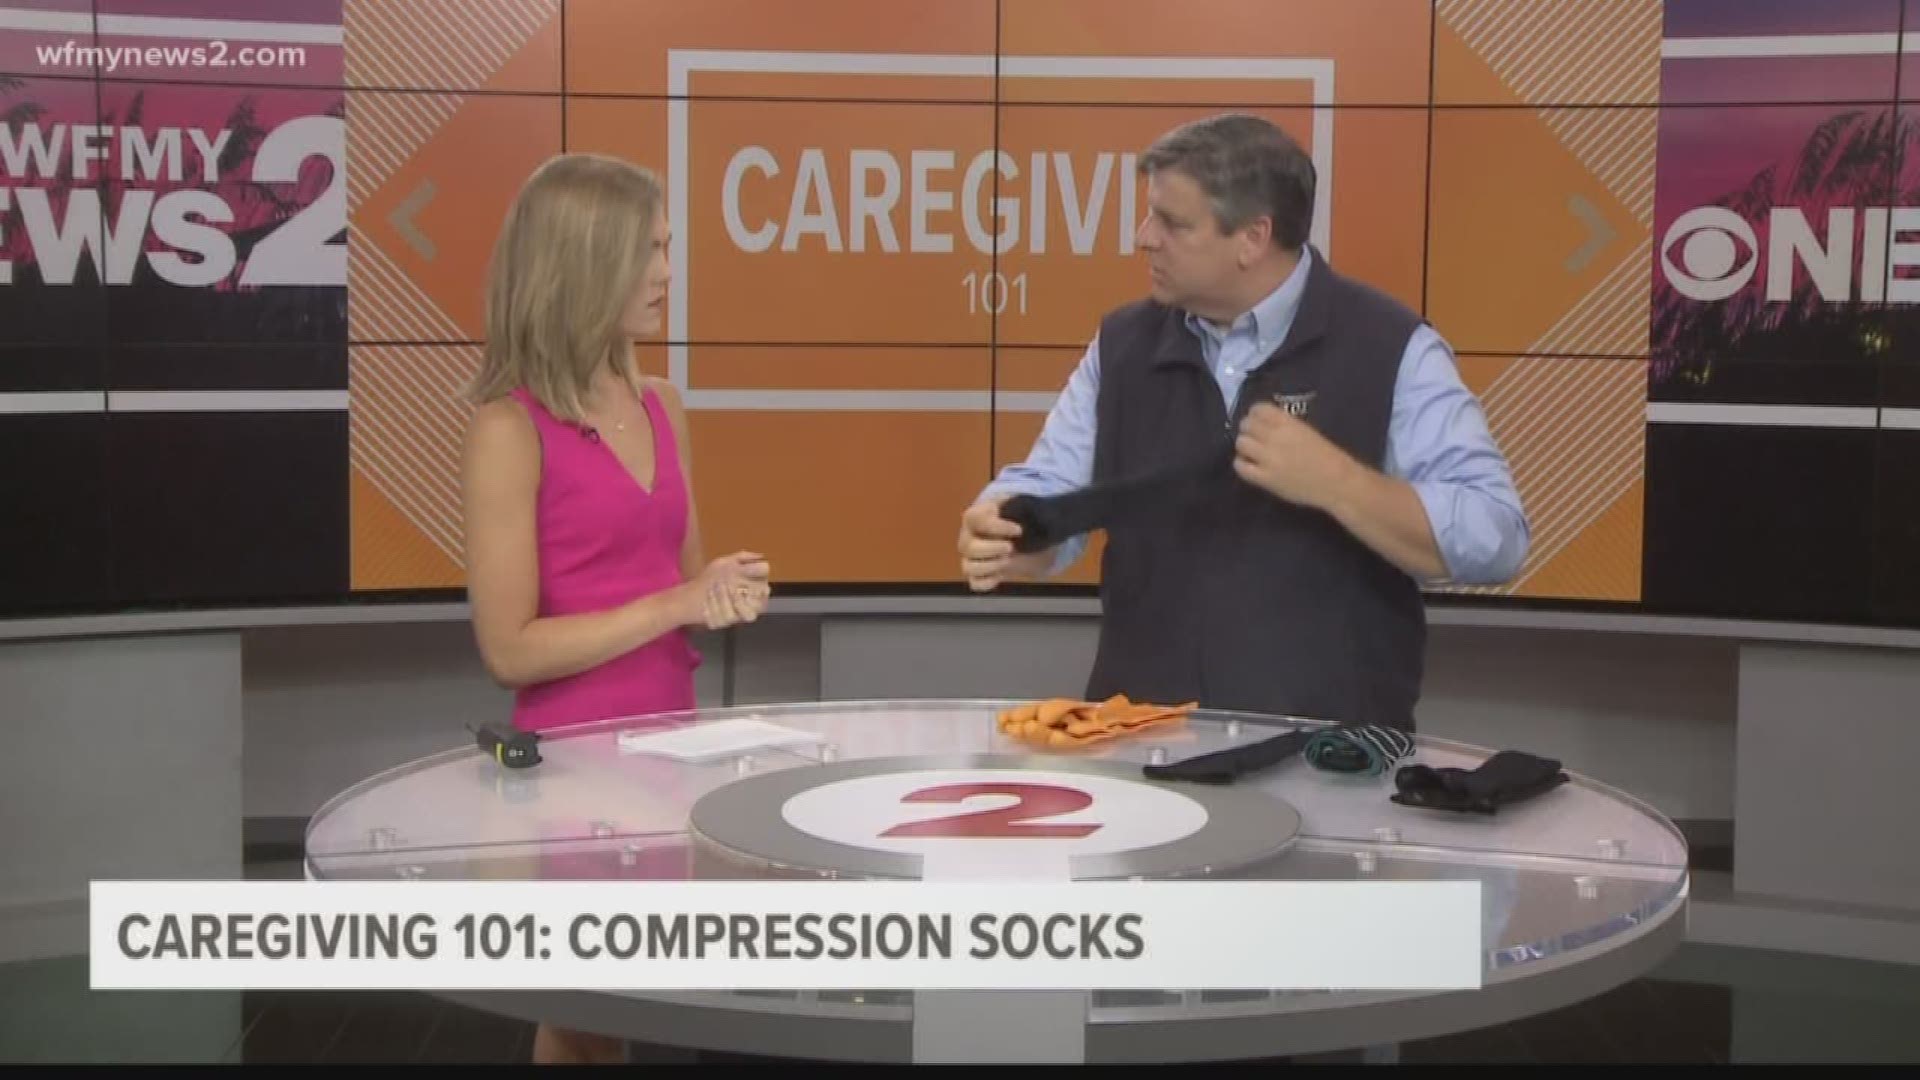 Scott Silknitter is in studio to break down what compression socks are and how to put them on.